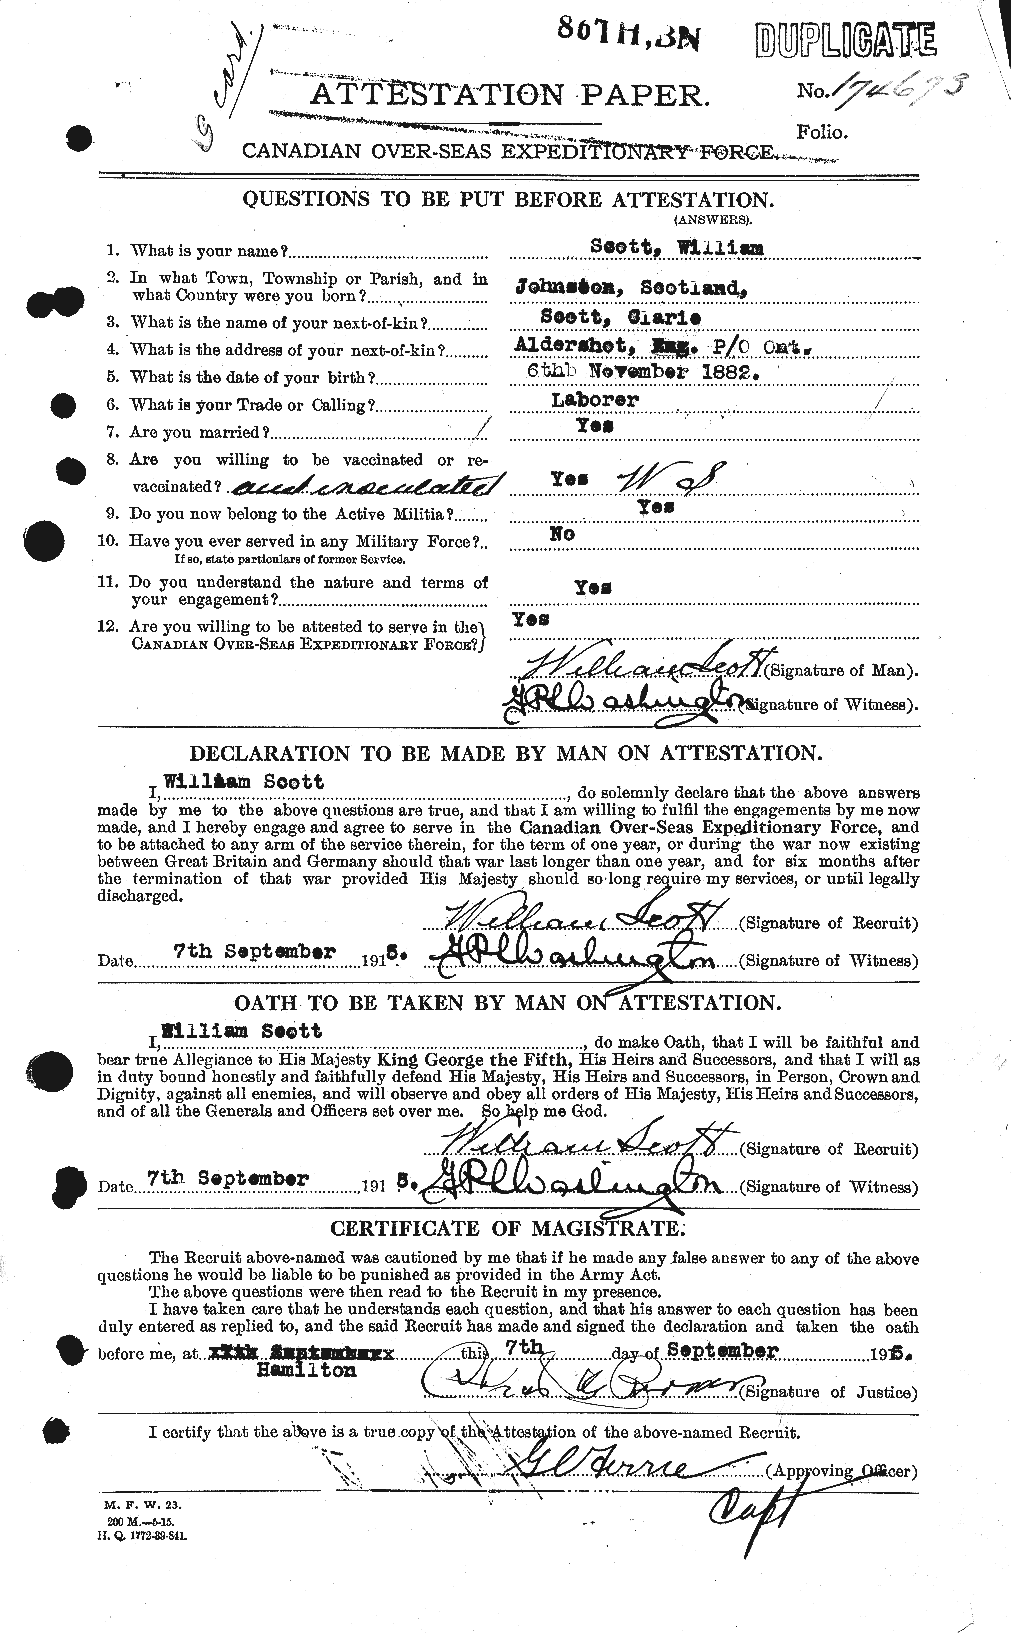 Personnel Records of the First World War - CEF 087358a